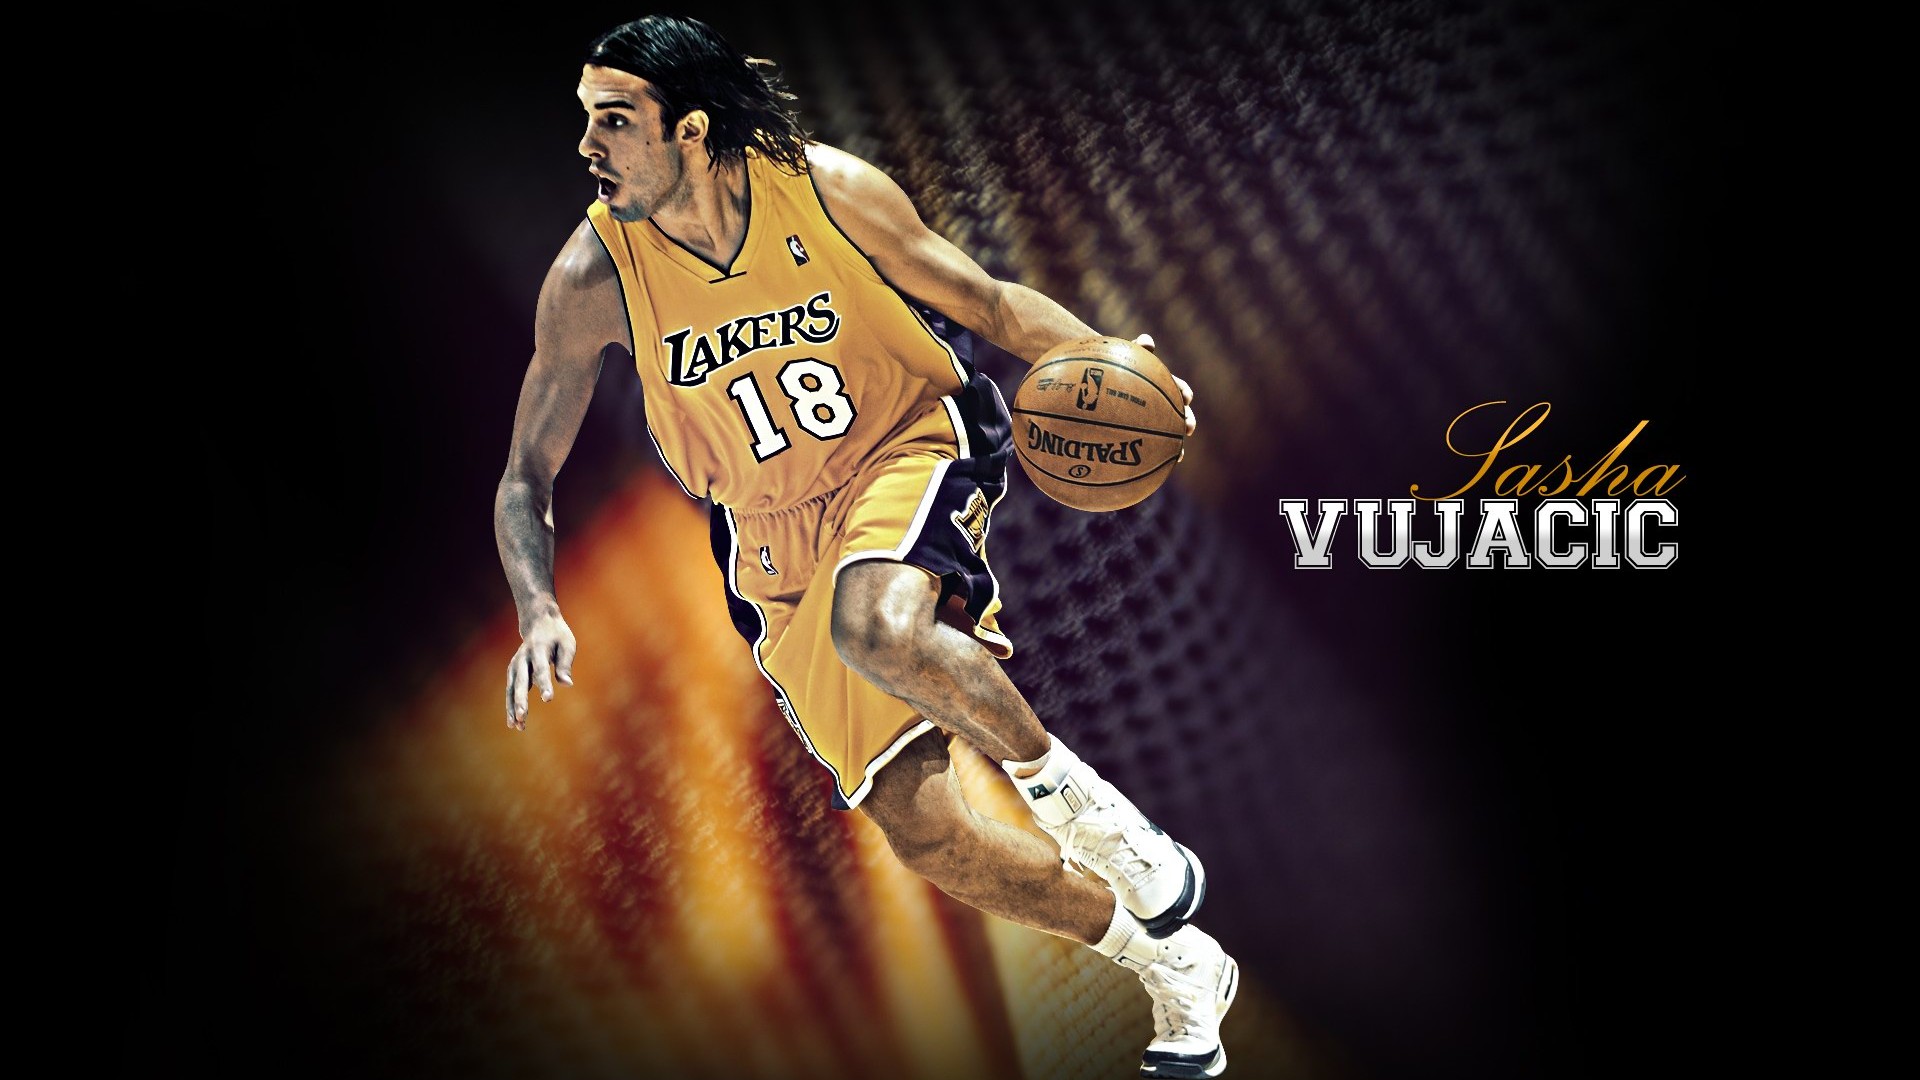 Los Angeles Lakers Wallpaper Oficial #22 - 1920x1080